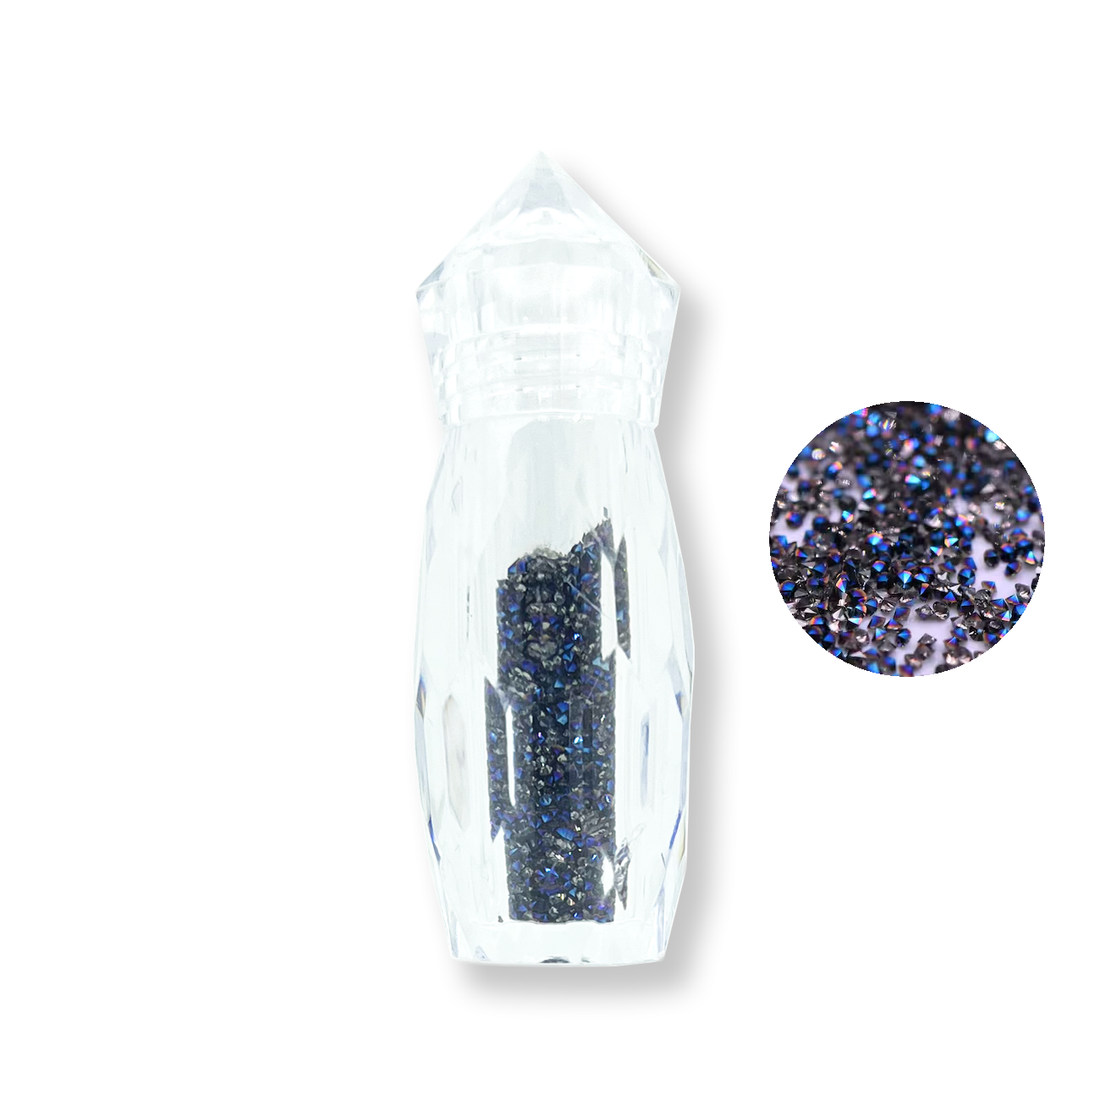 Sofi-Art Rhinestone Pixie Nail Art - Ancient Blue - Great Quality. Easy To Use, Fast Application and Simple Removal. Non-Toxic, Eco-Friendly. Long-Lasting.